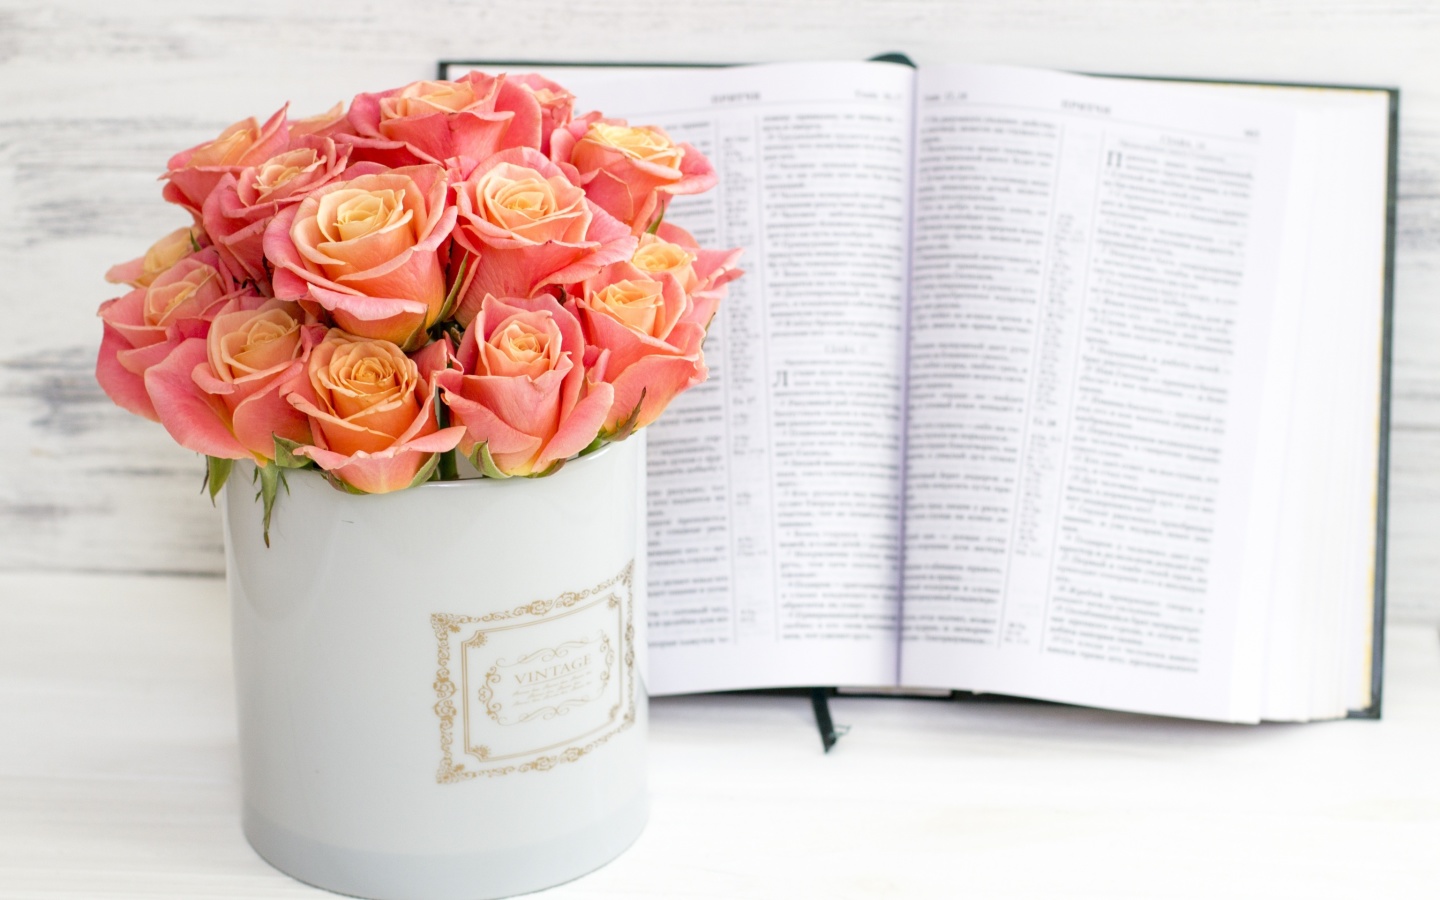 Roses and Book wallpaper 1440x900